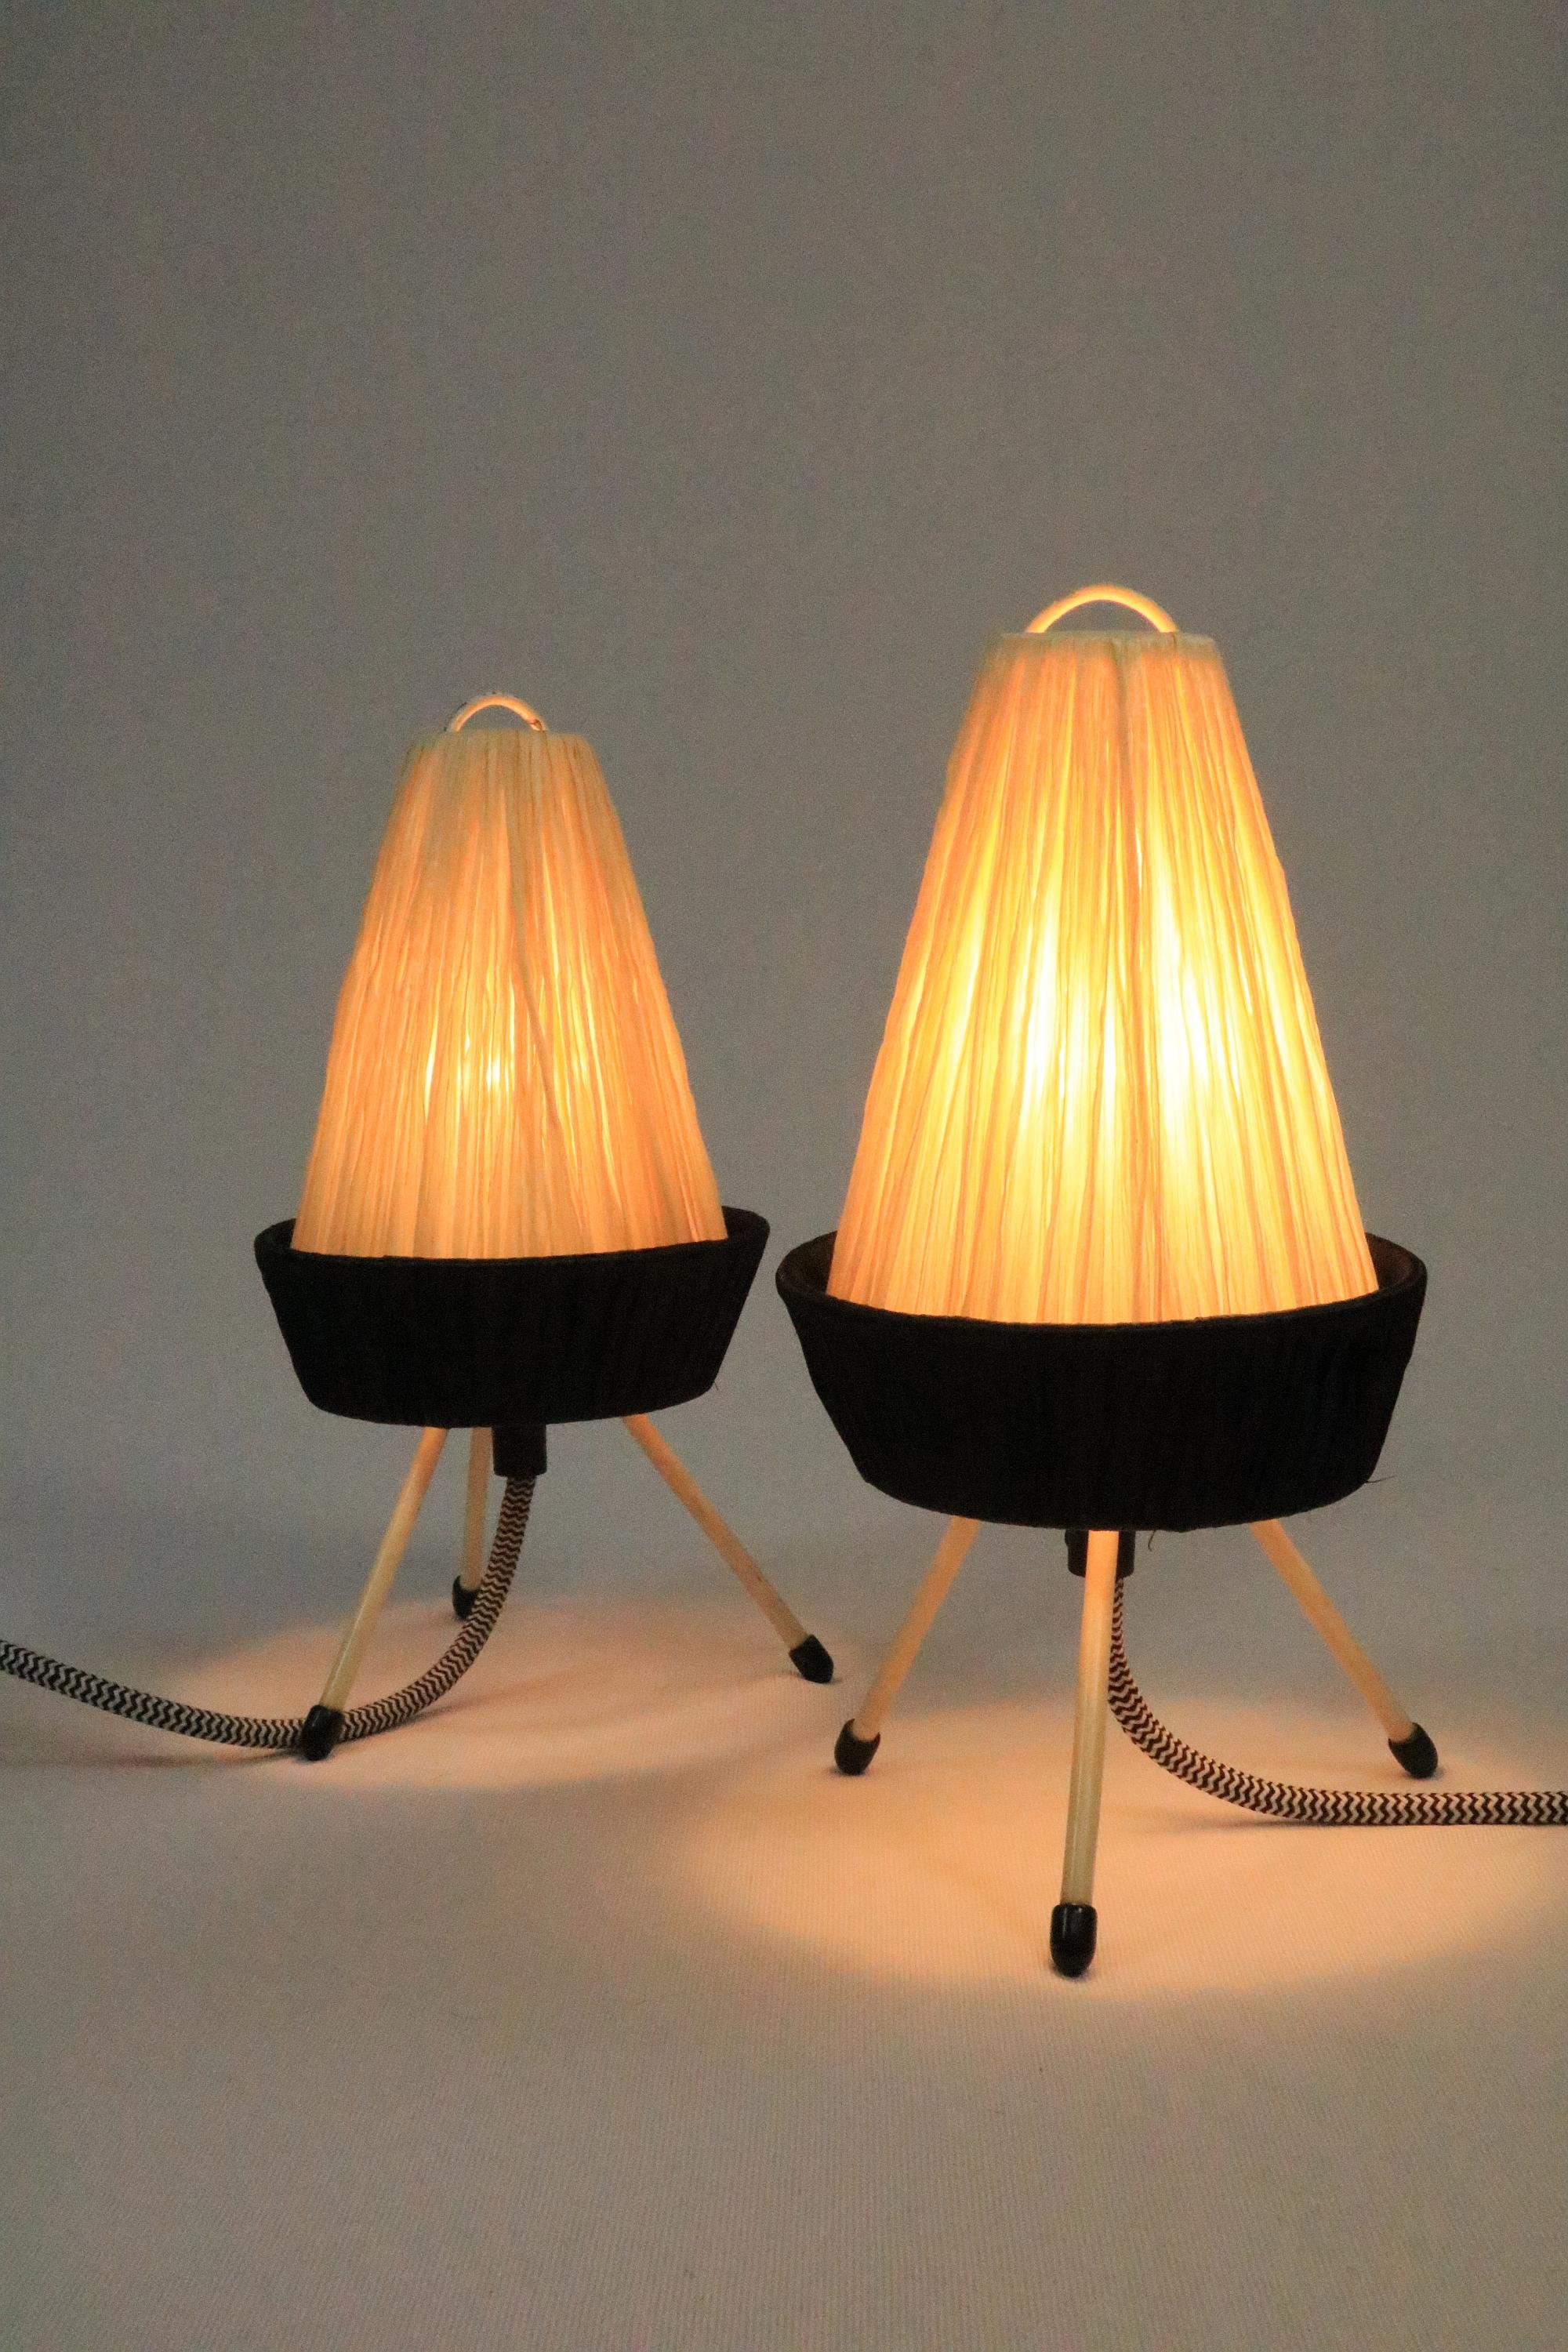 Set of 2 Filigree Table Lamps, Raffia Shade, Germany, Tripod, 1950s For Sale 3